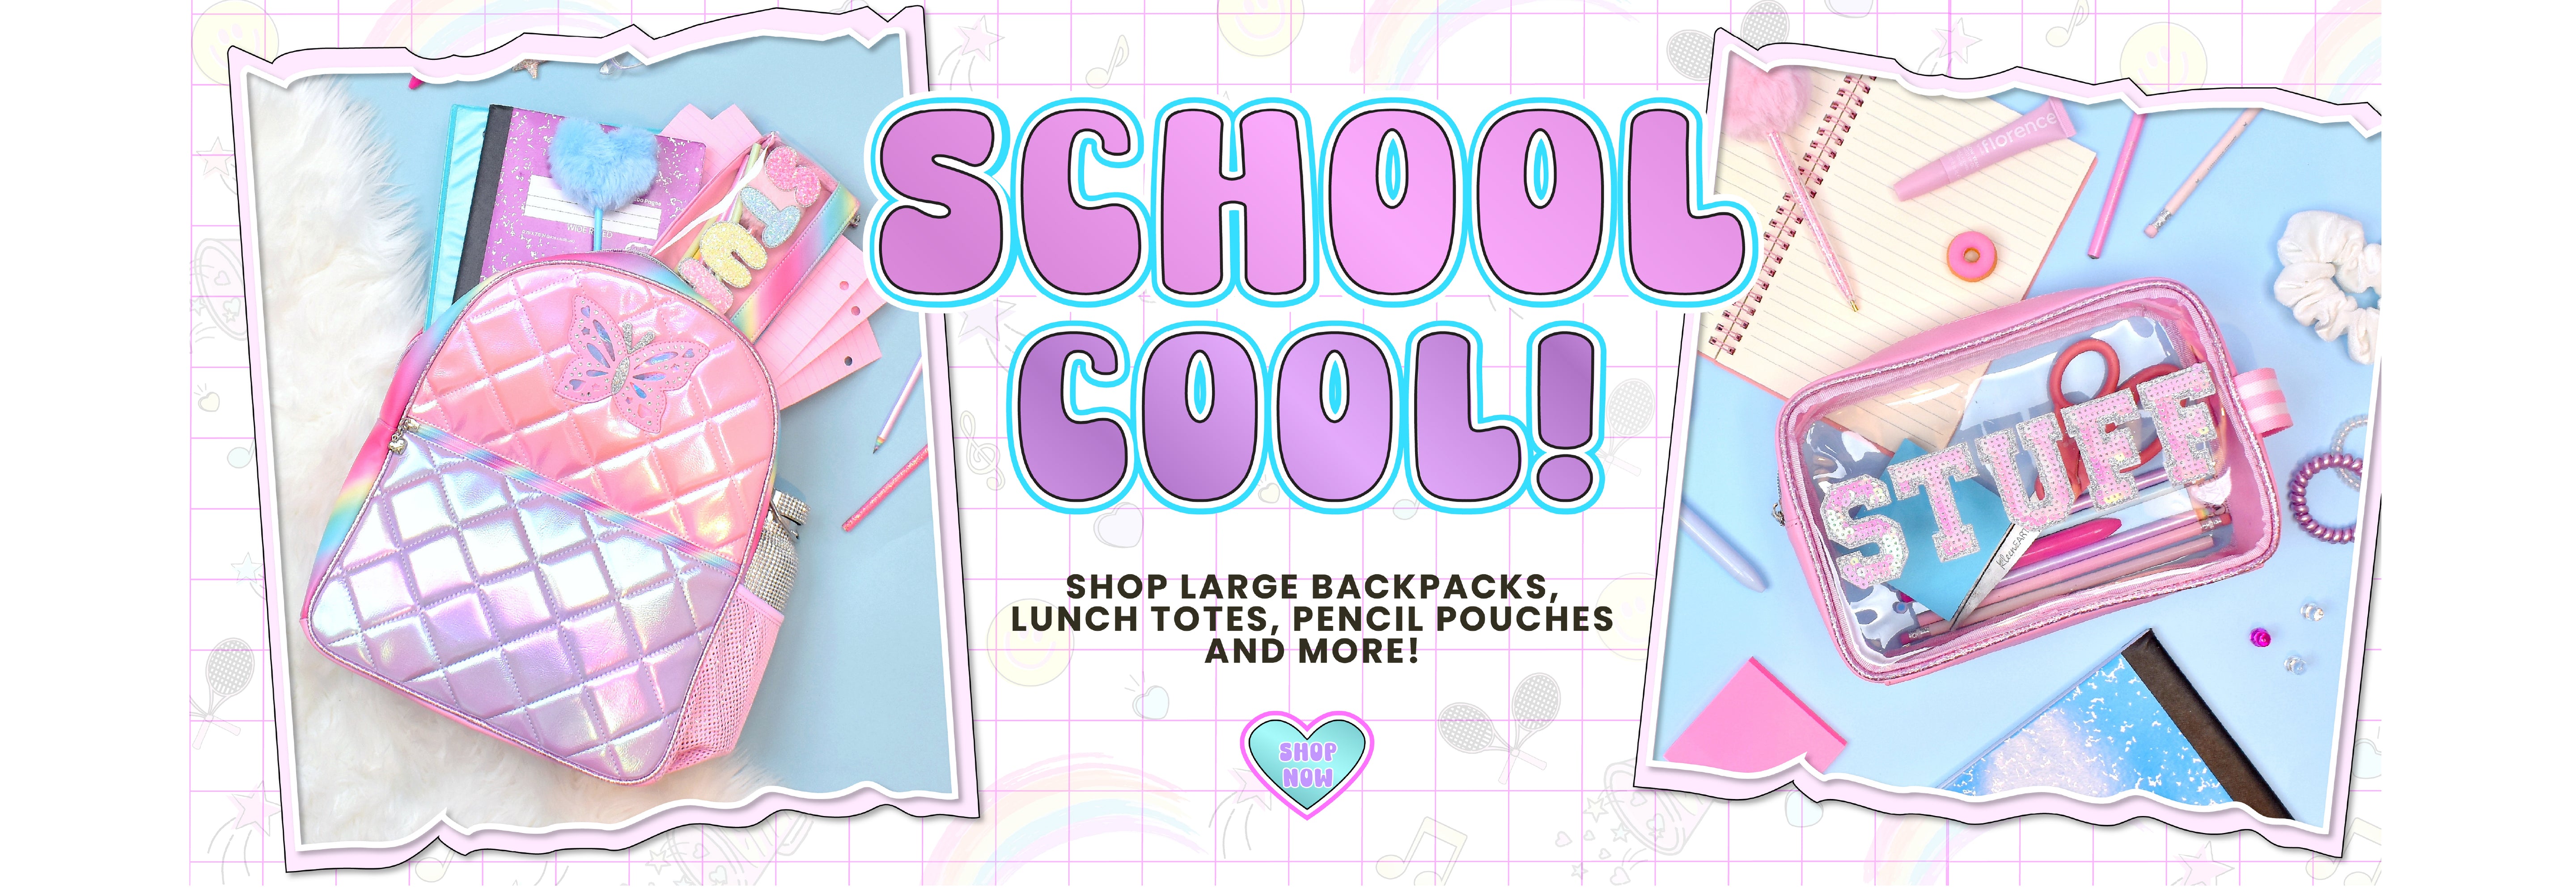 School Cool! Shop Large Backpacks, Lunch Totes, Pencil Pouches and more!